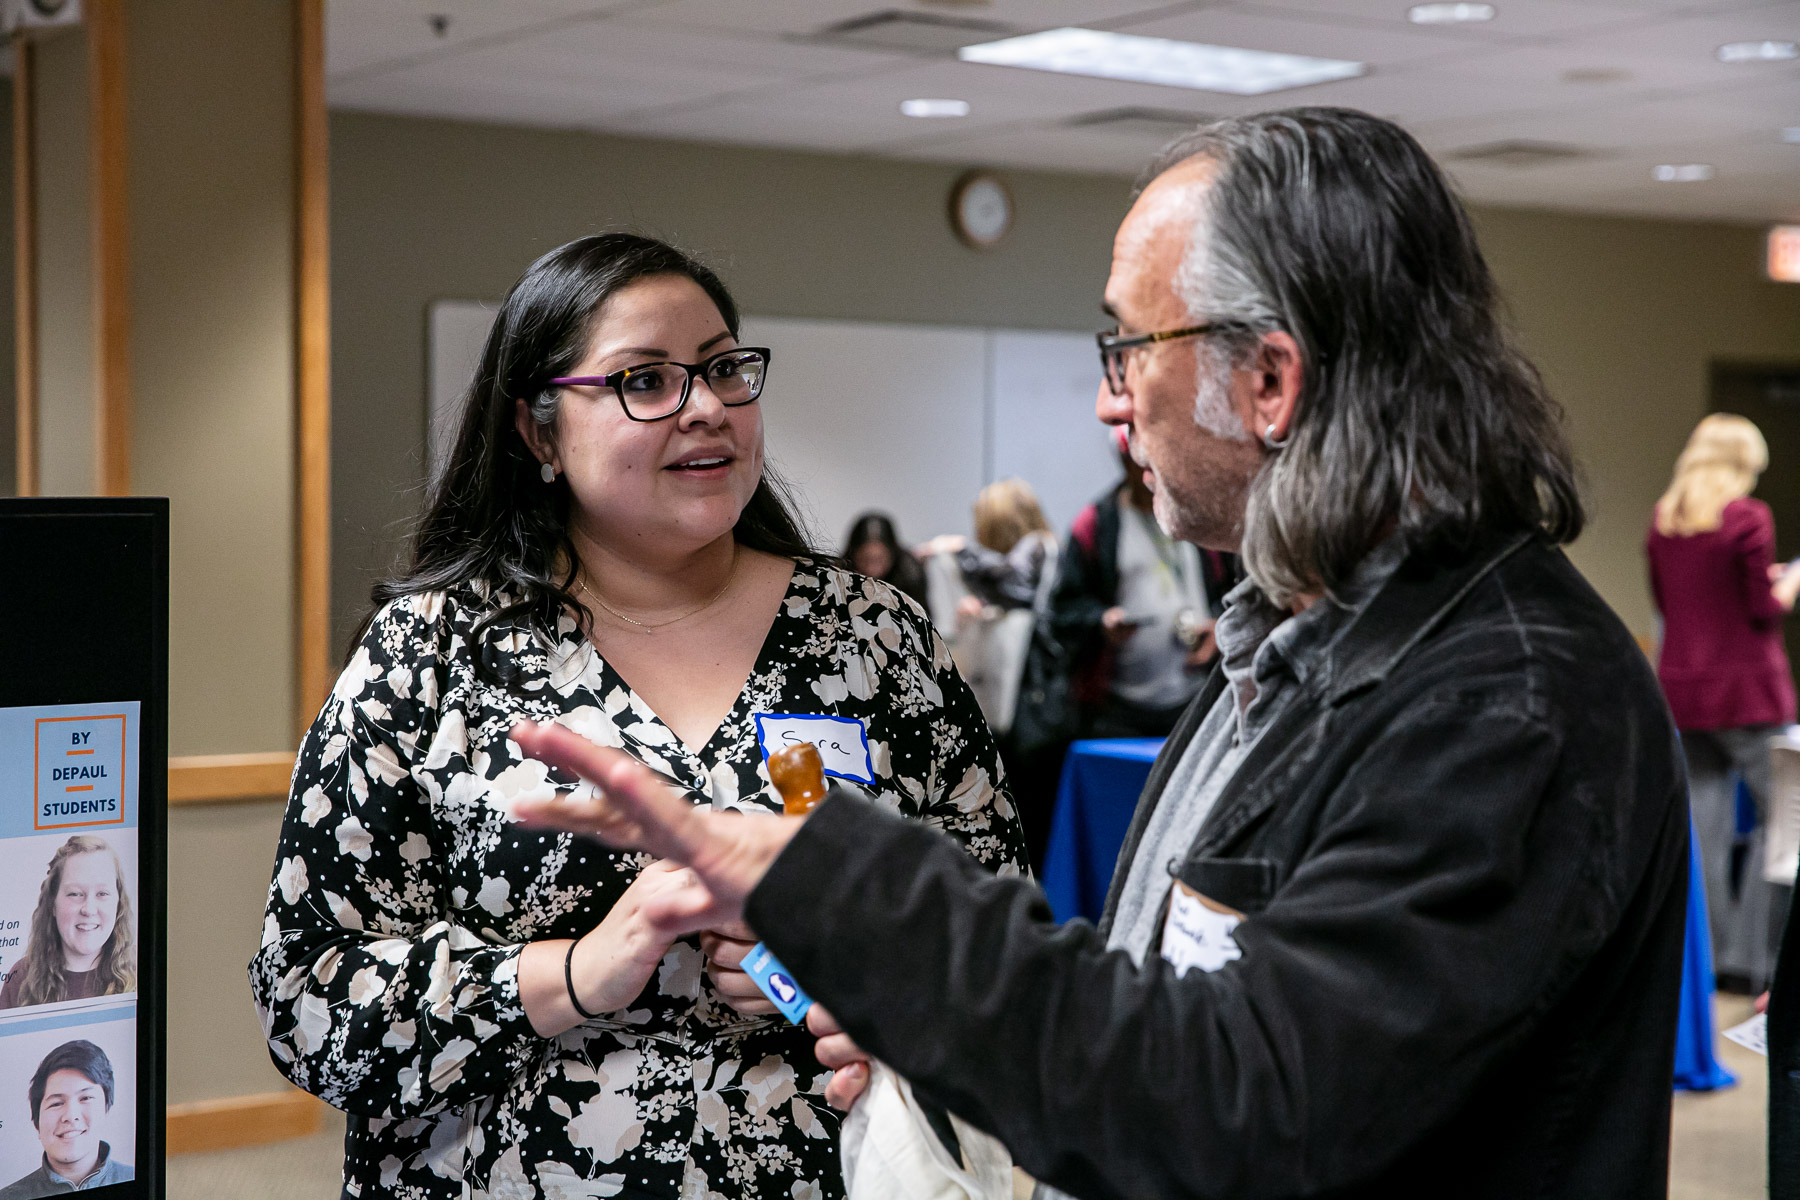 Sara Hernandez, assistant director for supplemental instruction in the Center for Teaching and Learning, talks with an attendee. (DePaul University/Randall Spriggs)